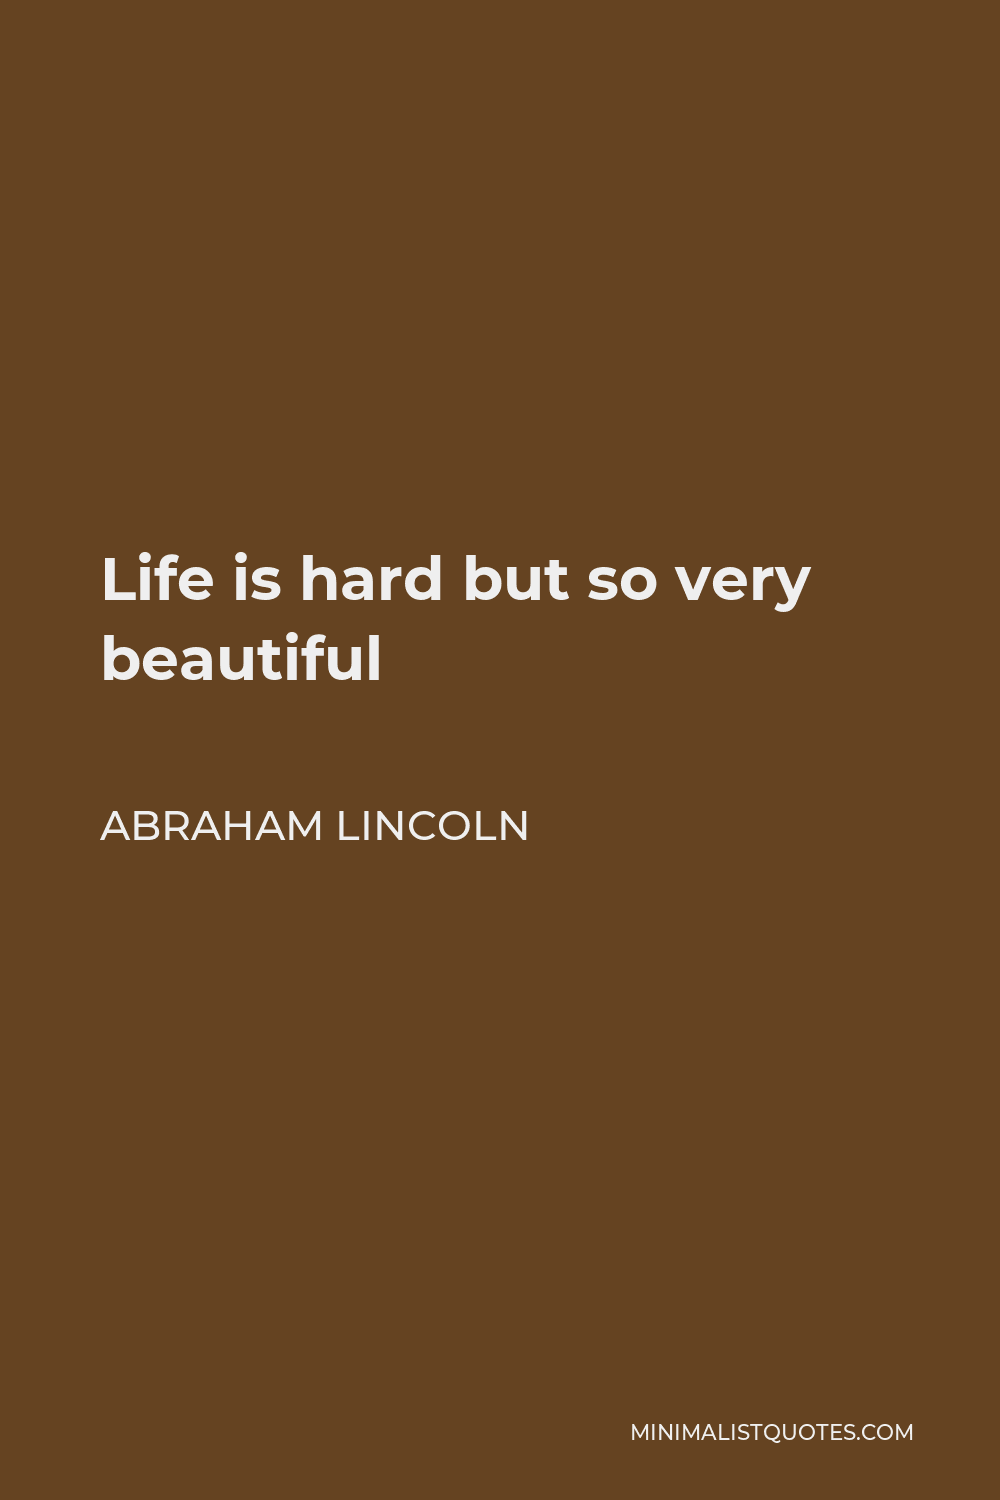 Abraham Lincoln Quote - Life is hard but so very beautiful